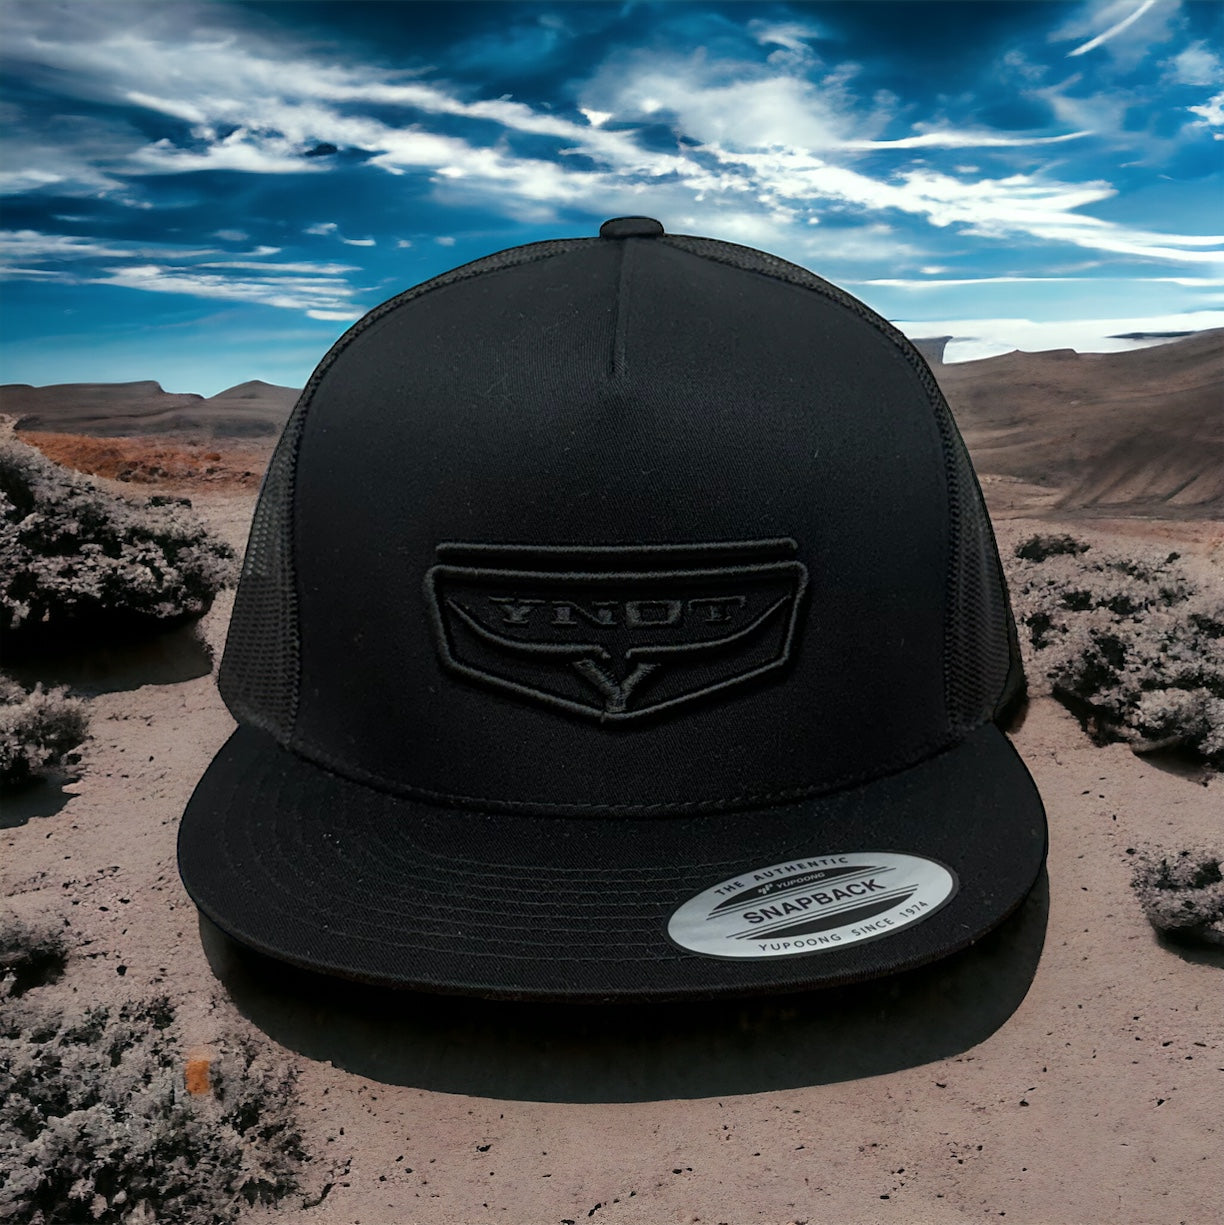 YNOT Lifestyle Brand Hat and Apparel - Quality Western, Farmer & Rancher Hats